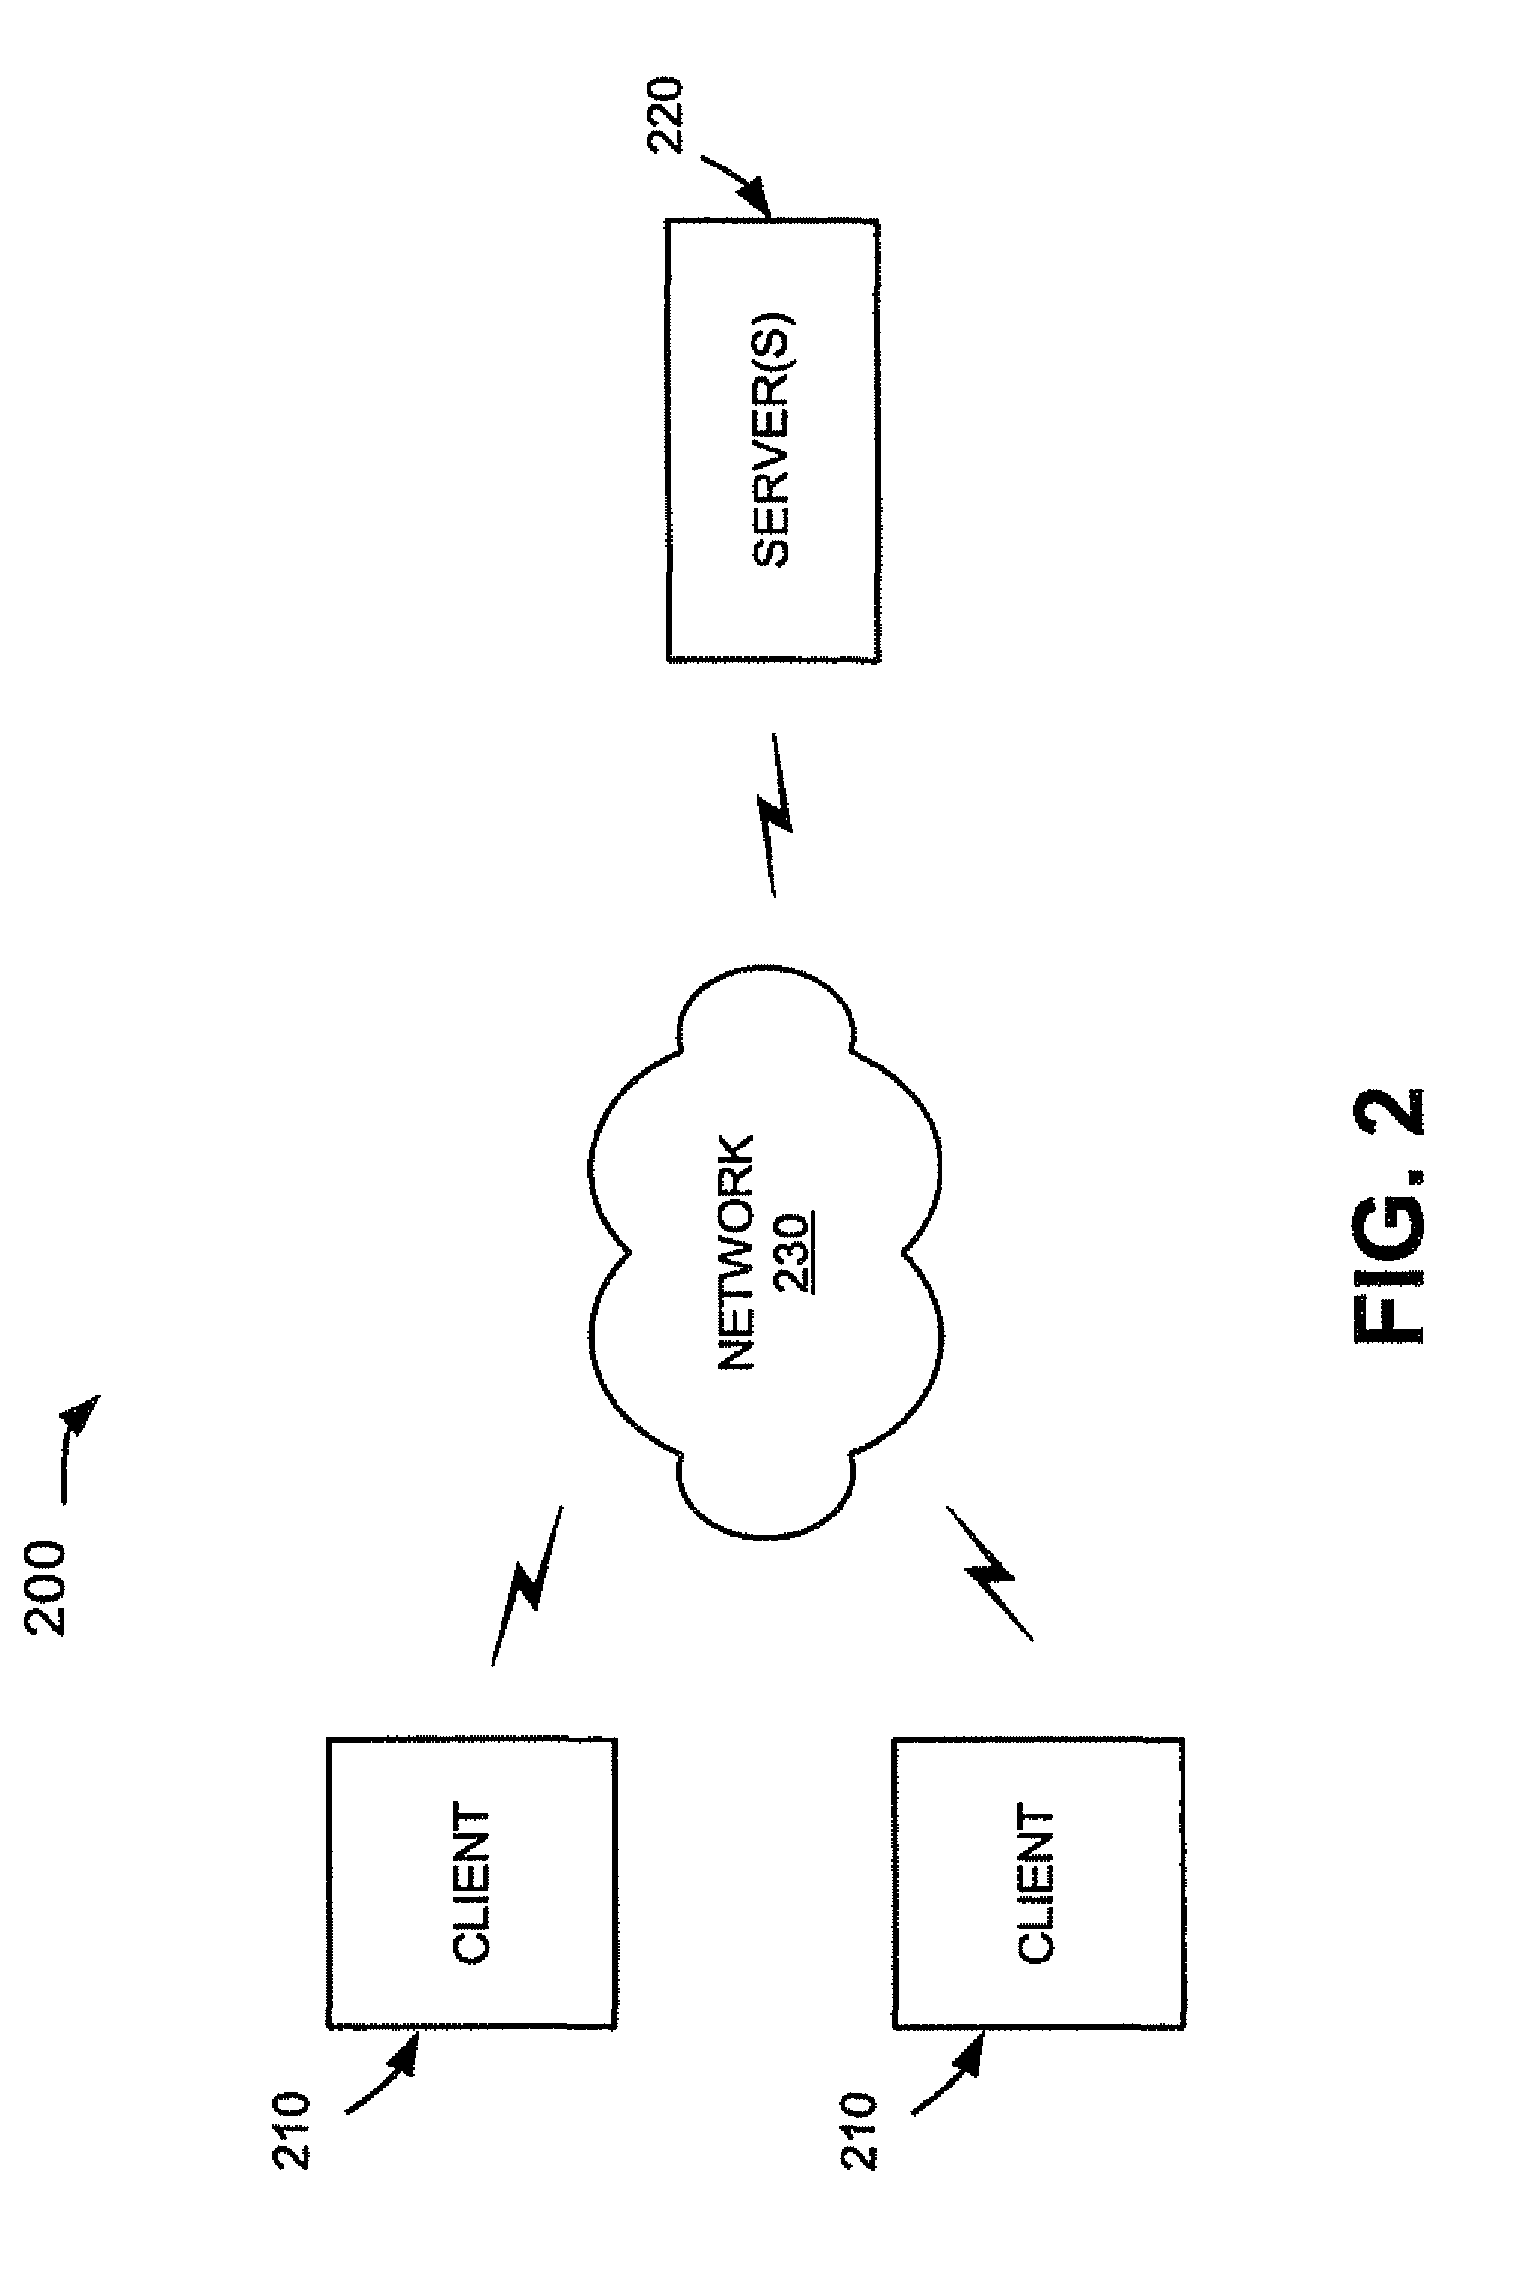 Context-aware processes for allowing users of network services to access account information